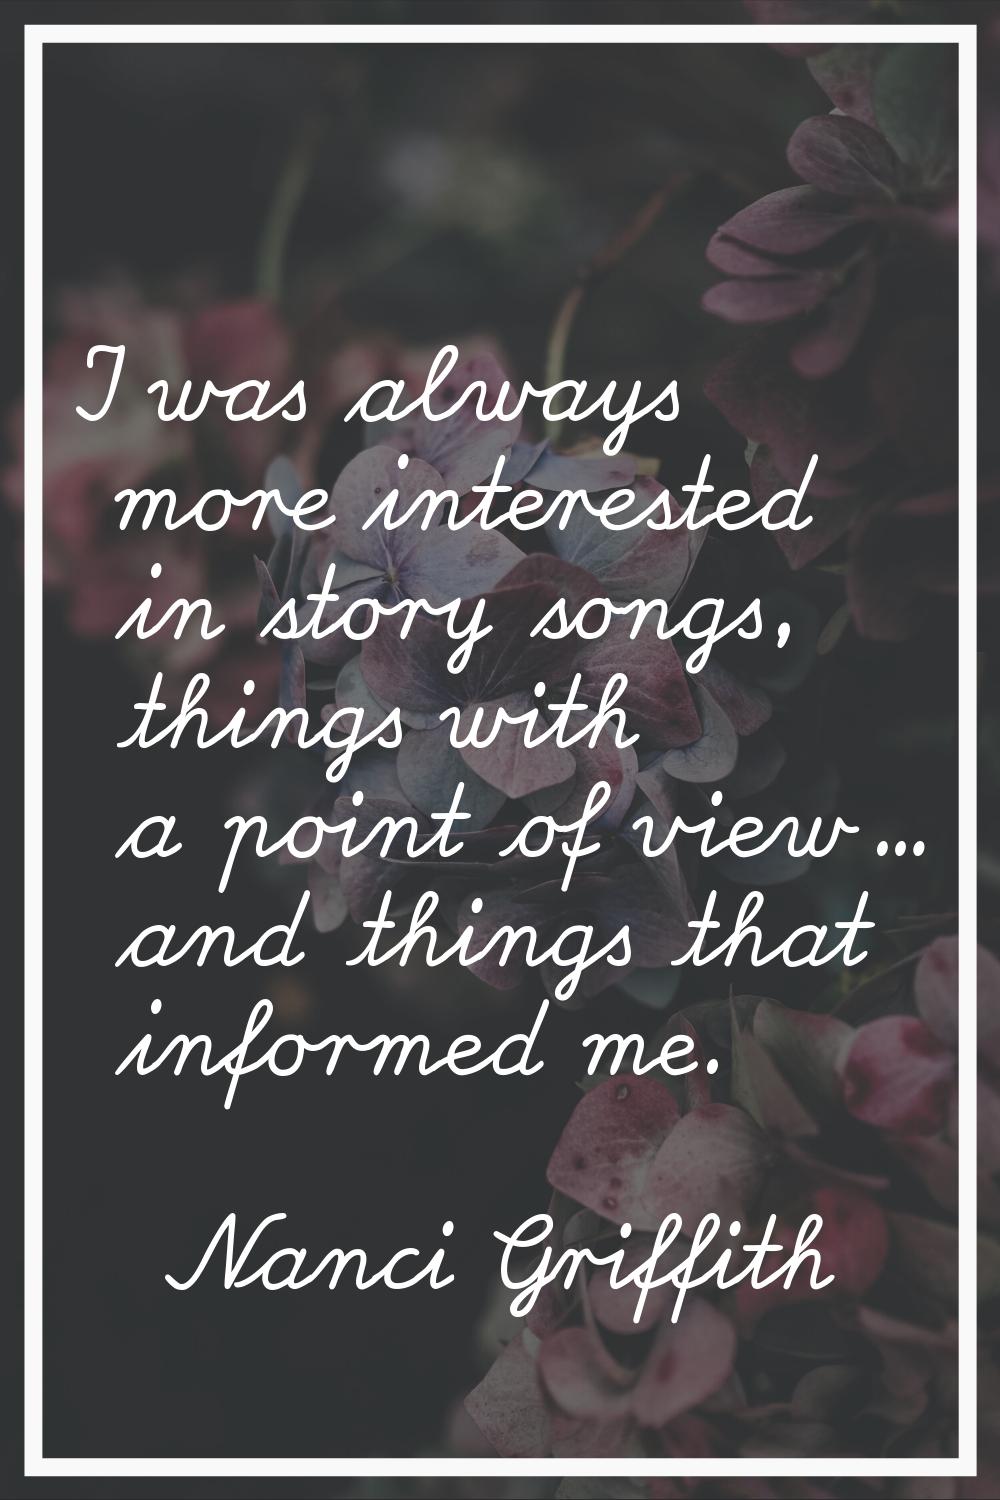 I was always more interested in story songs, things with a point of view... and things that informe